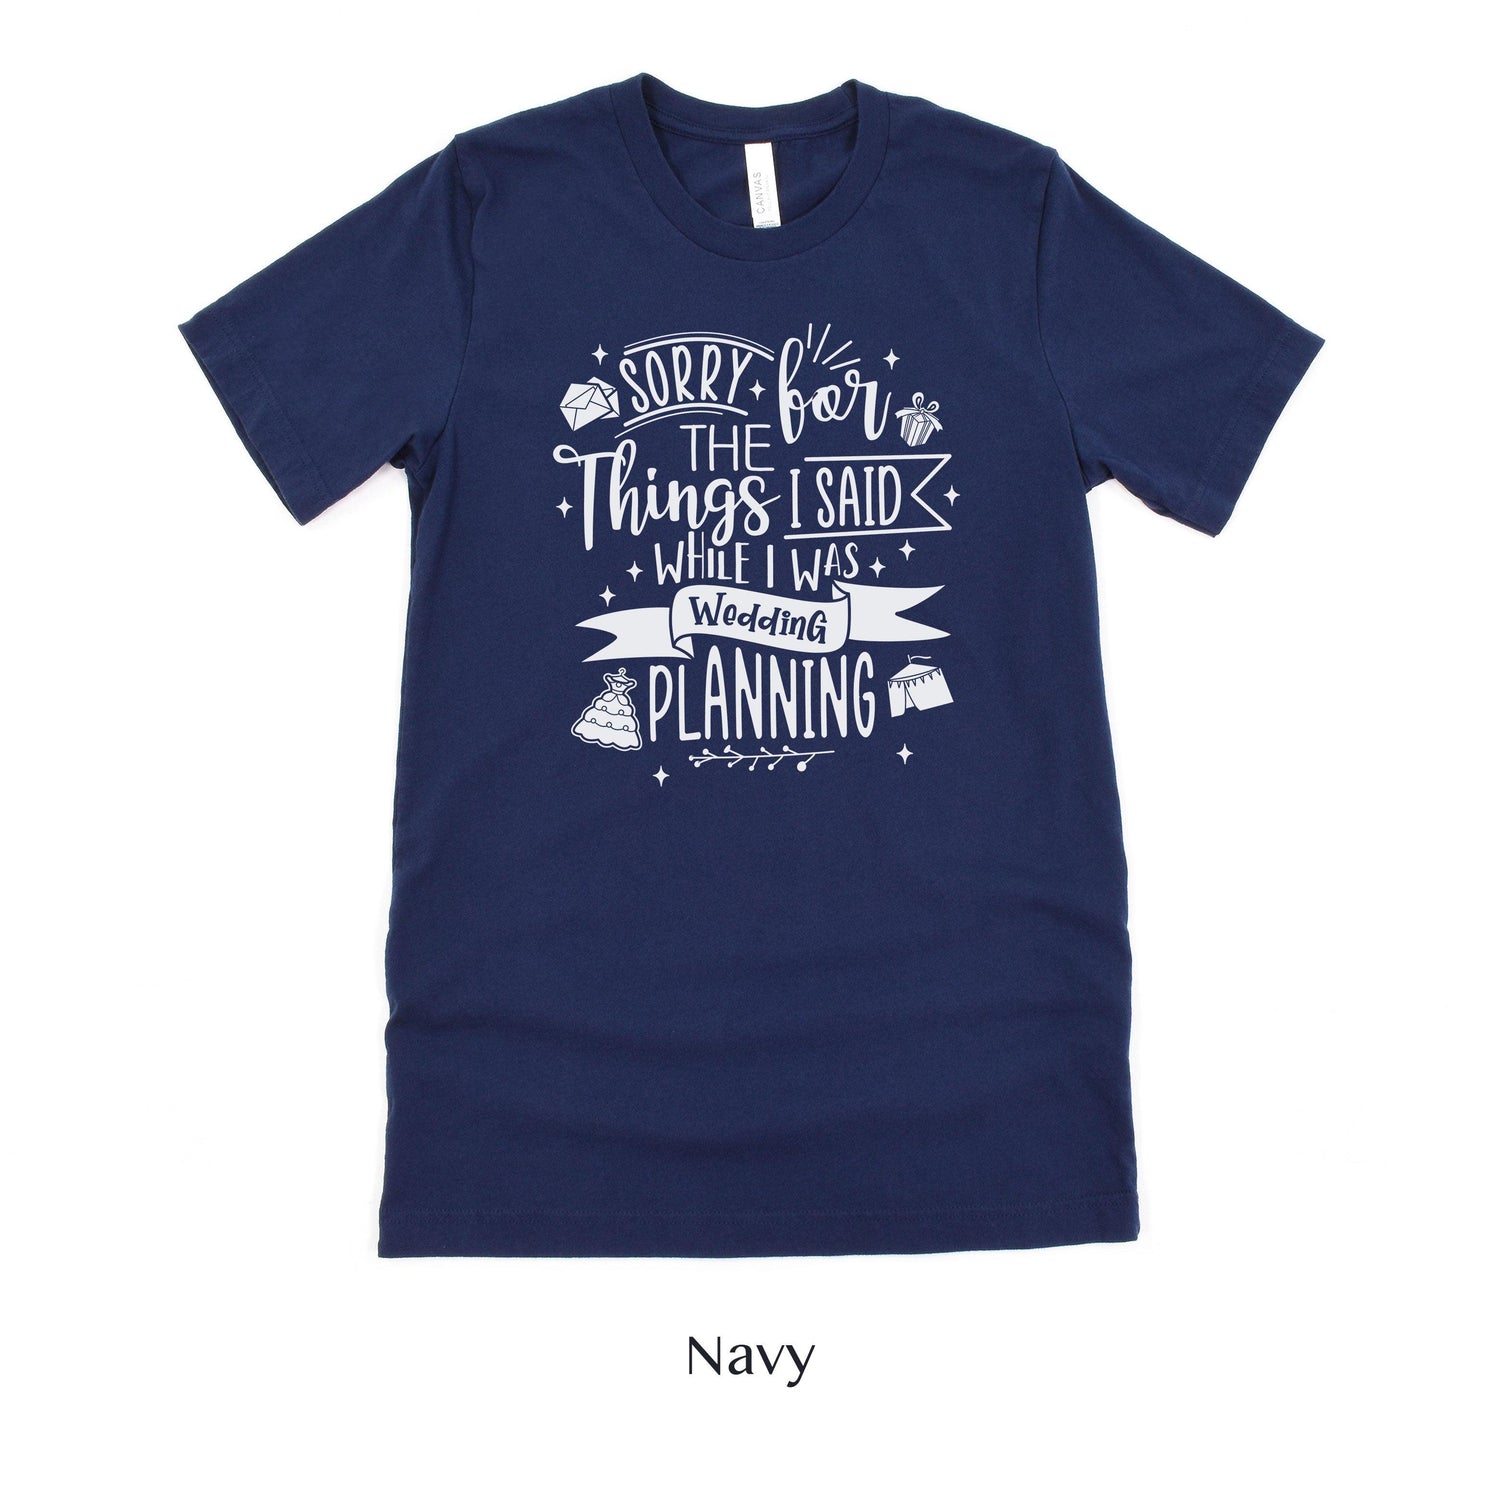 Sorry for the Things I said Wedding Planning - Bride to Be - Wedding Planner Event Coordinator Shirt by Oaklynn Lane